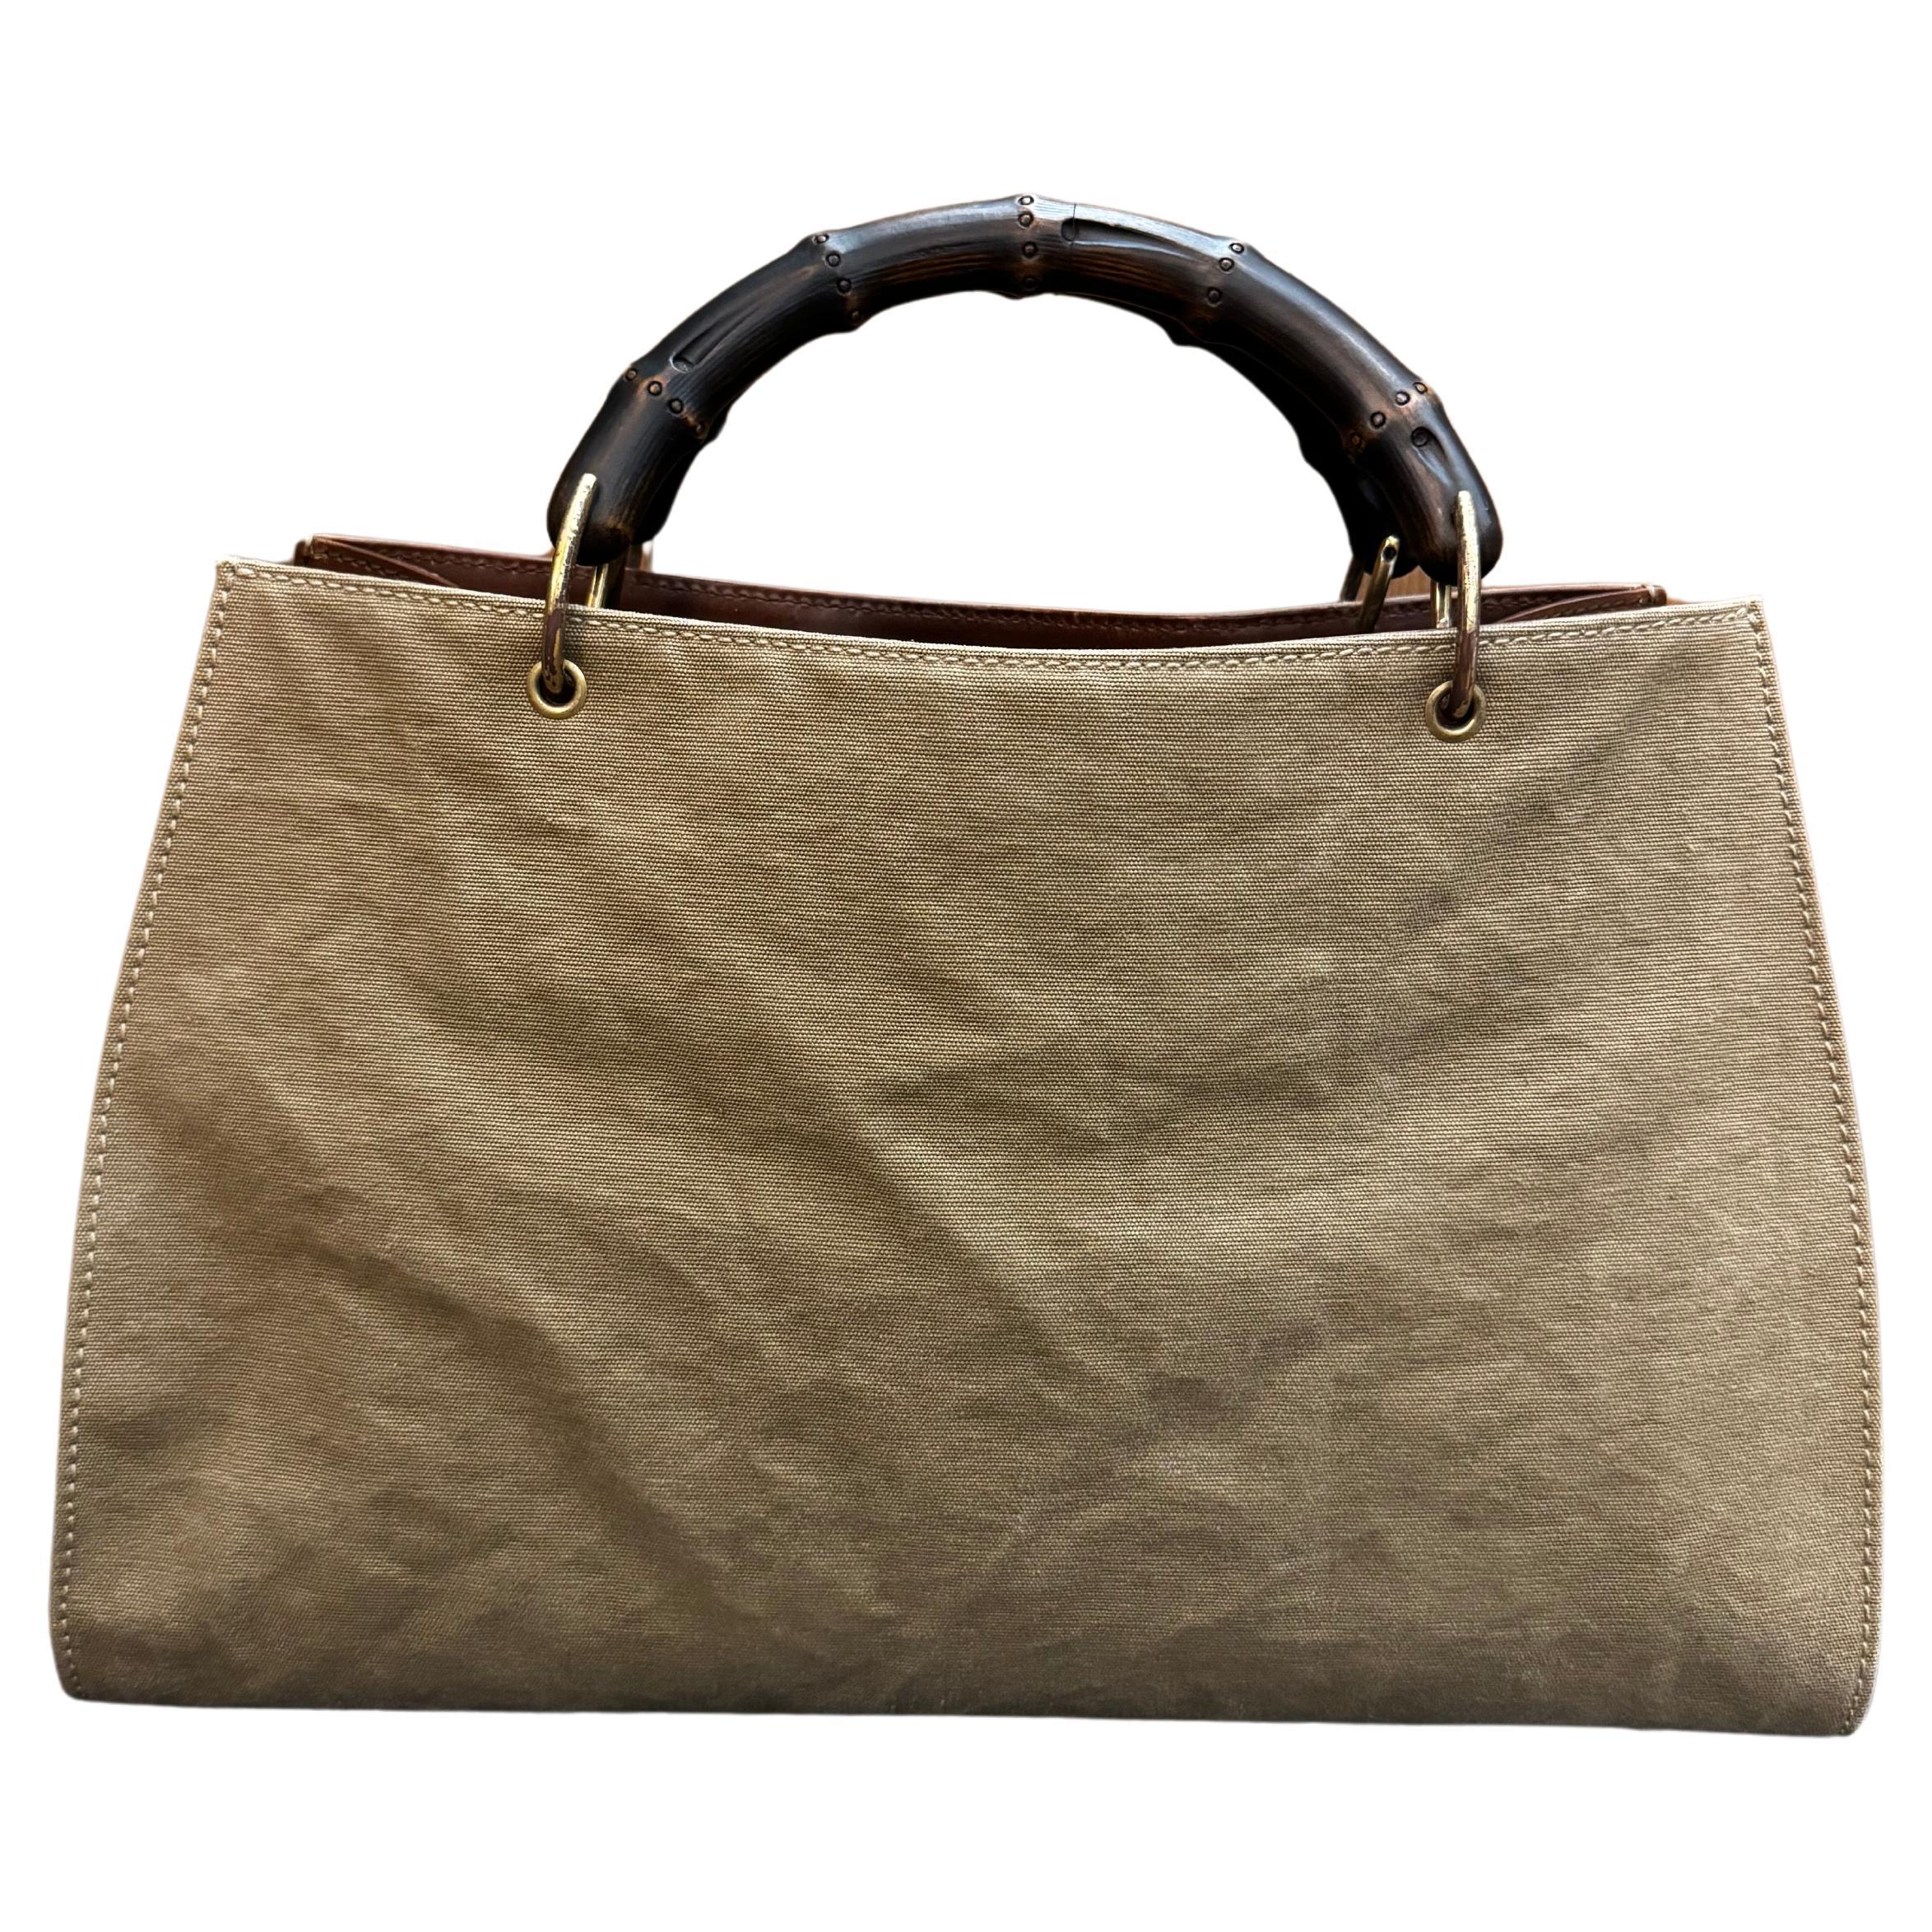 This vintage GUCCI bamboo tote is crafted of canvas in khaki and smooth calfskin leather in brown featuring gold toned hardware and sturdy bamboo handles. Wide top opens to a zippered compartment in the middle and two open compartments featuring a